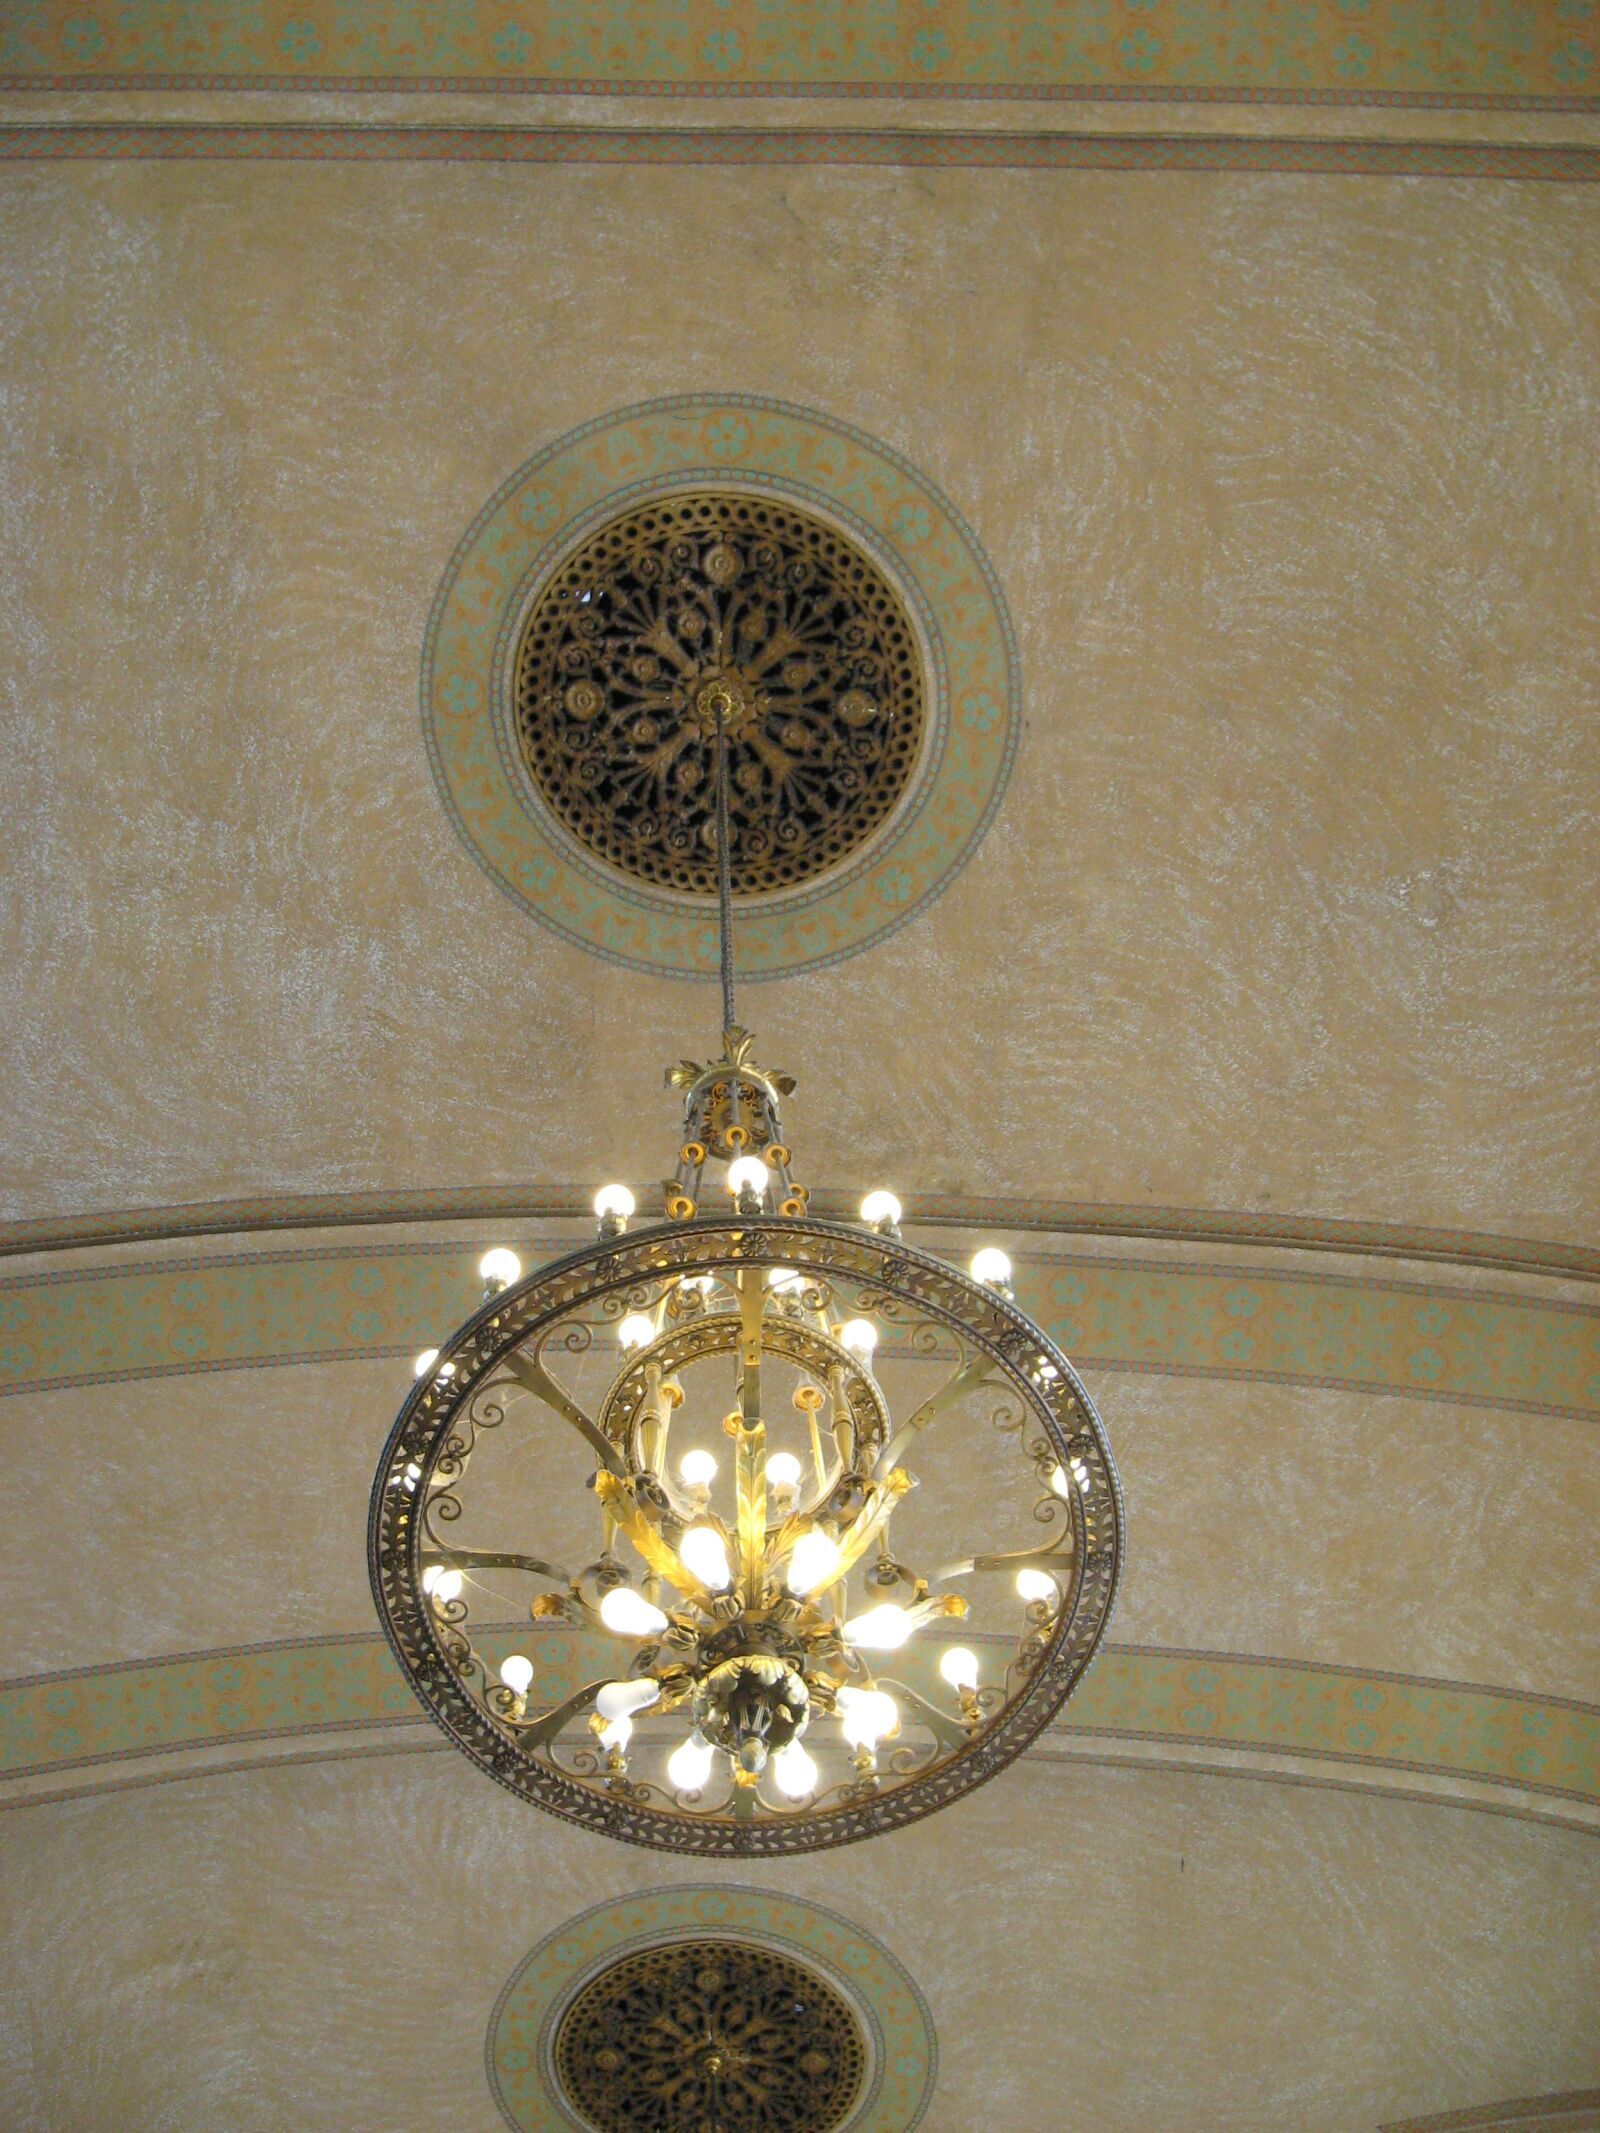 Canon POWERSHOT A570 IS sample photo. Chandelier, medallion, decorative photography